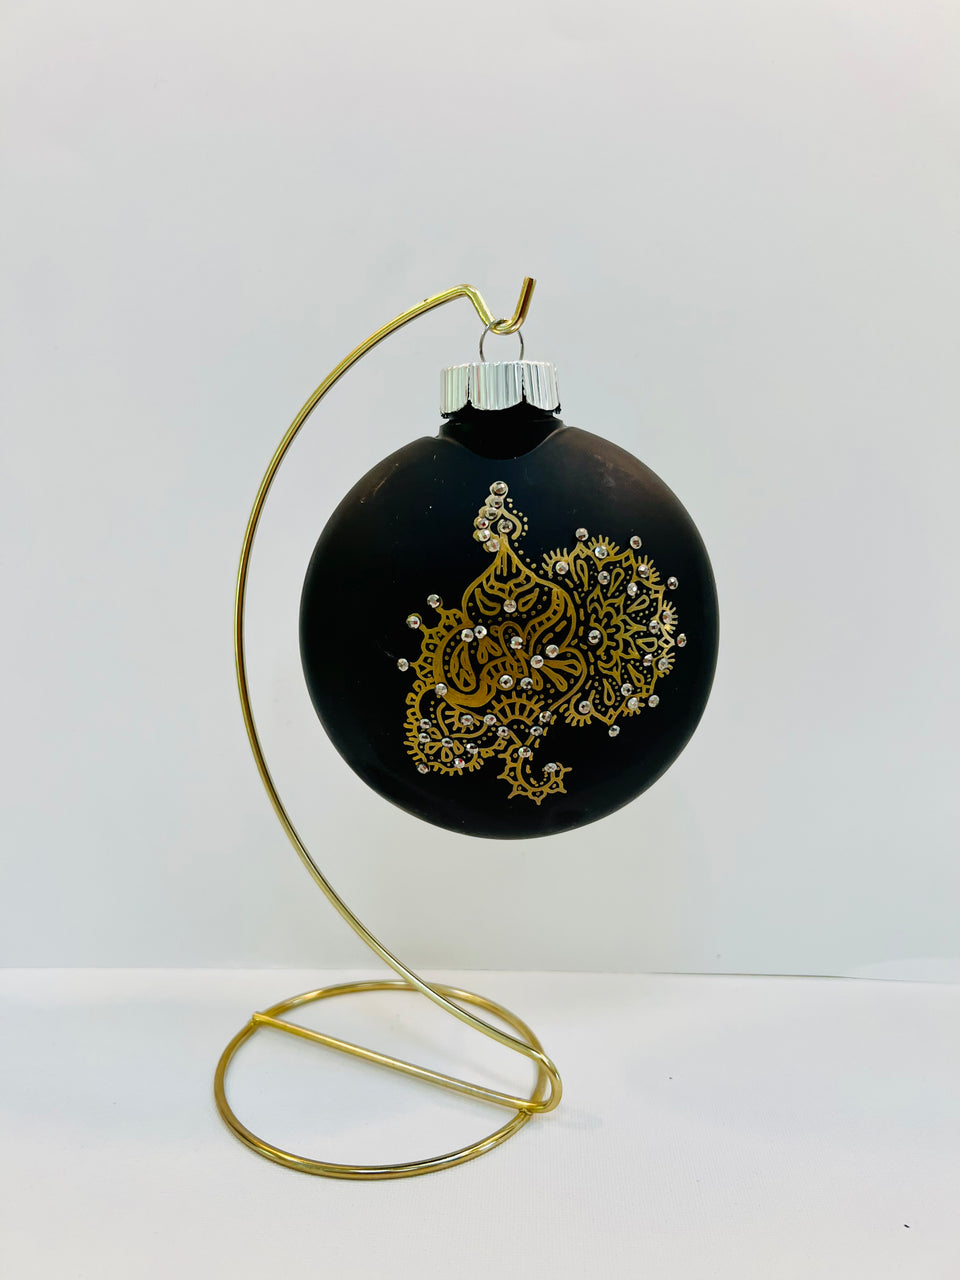 Black Shatterproof Ornament with Hand-painted Gold Mandala with Silver Beading